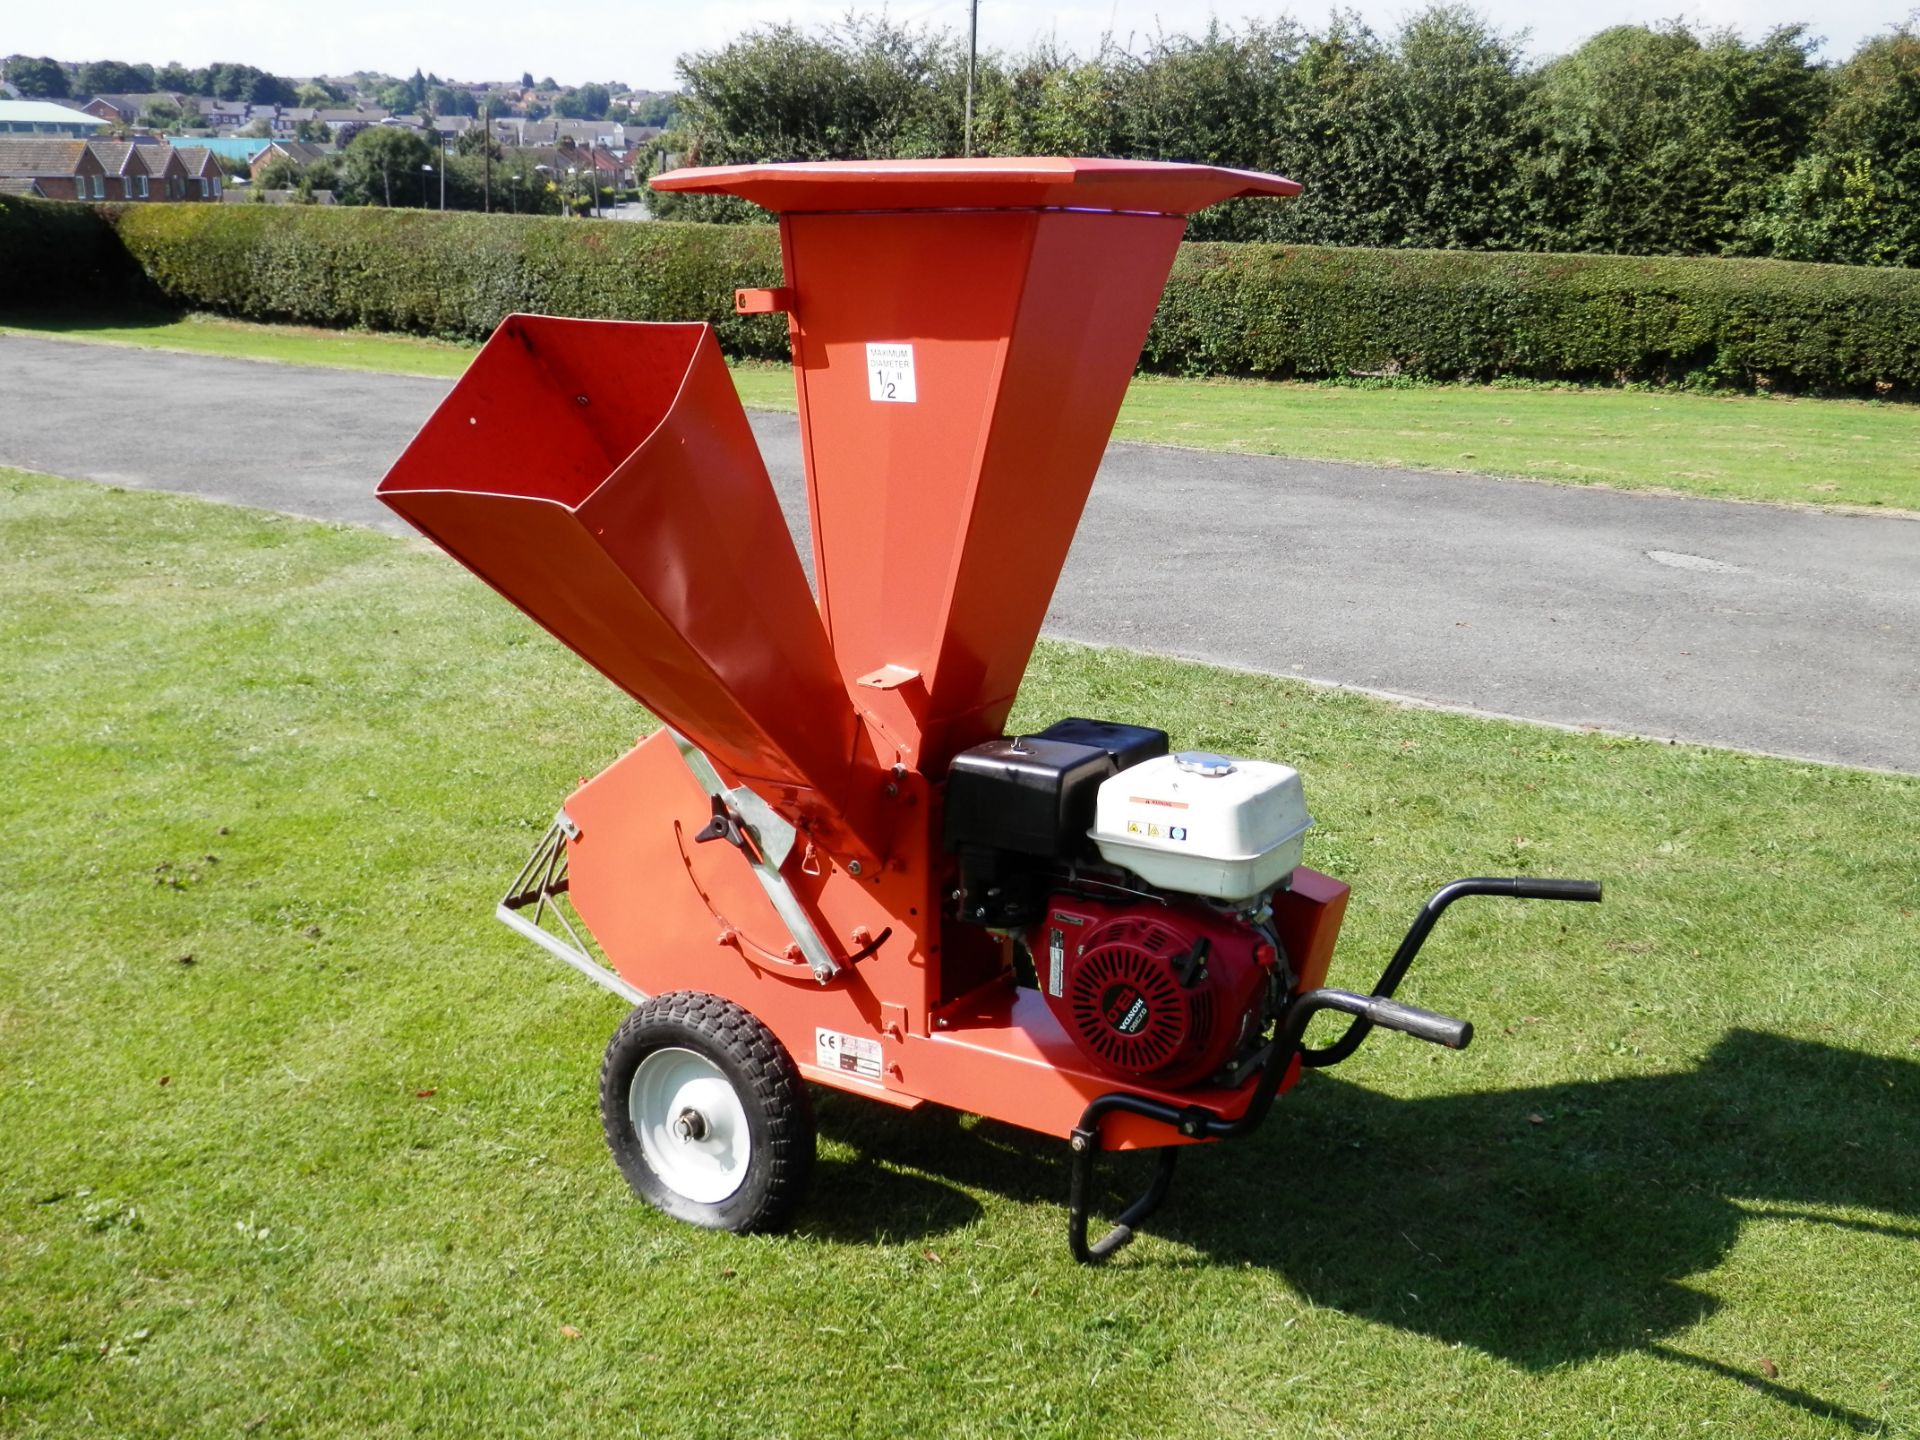 SUPERB CAMON C150 3.5" PETROL POWERED WOOD CHIPPER 13HP HONDA ENGINE, TESTED & WORKING WELL - Image 3 of 6